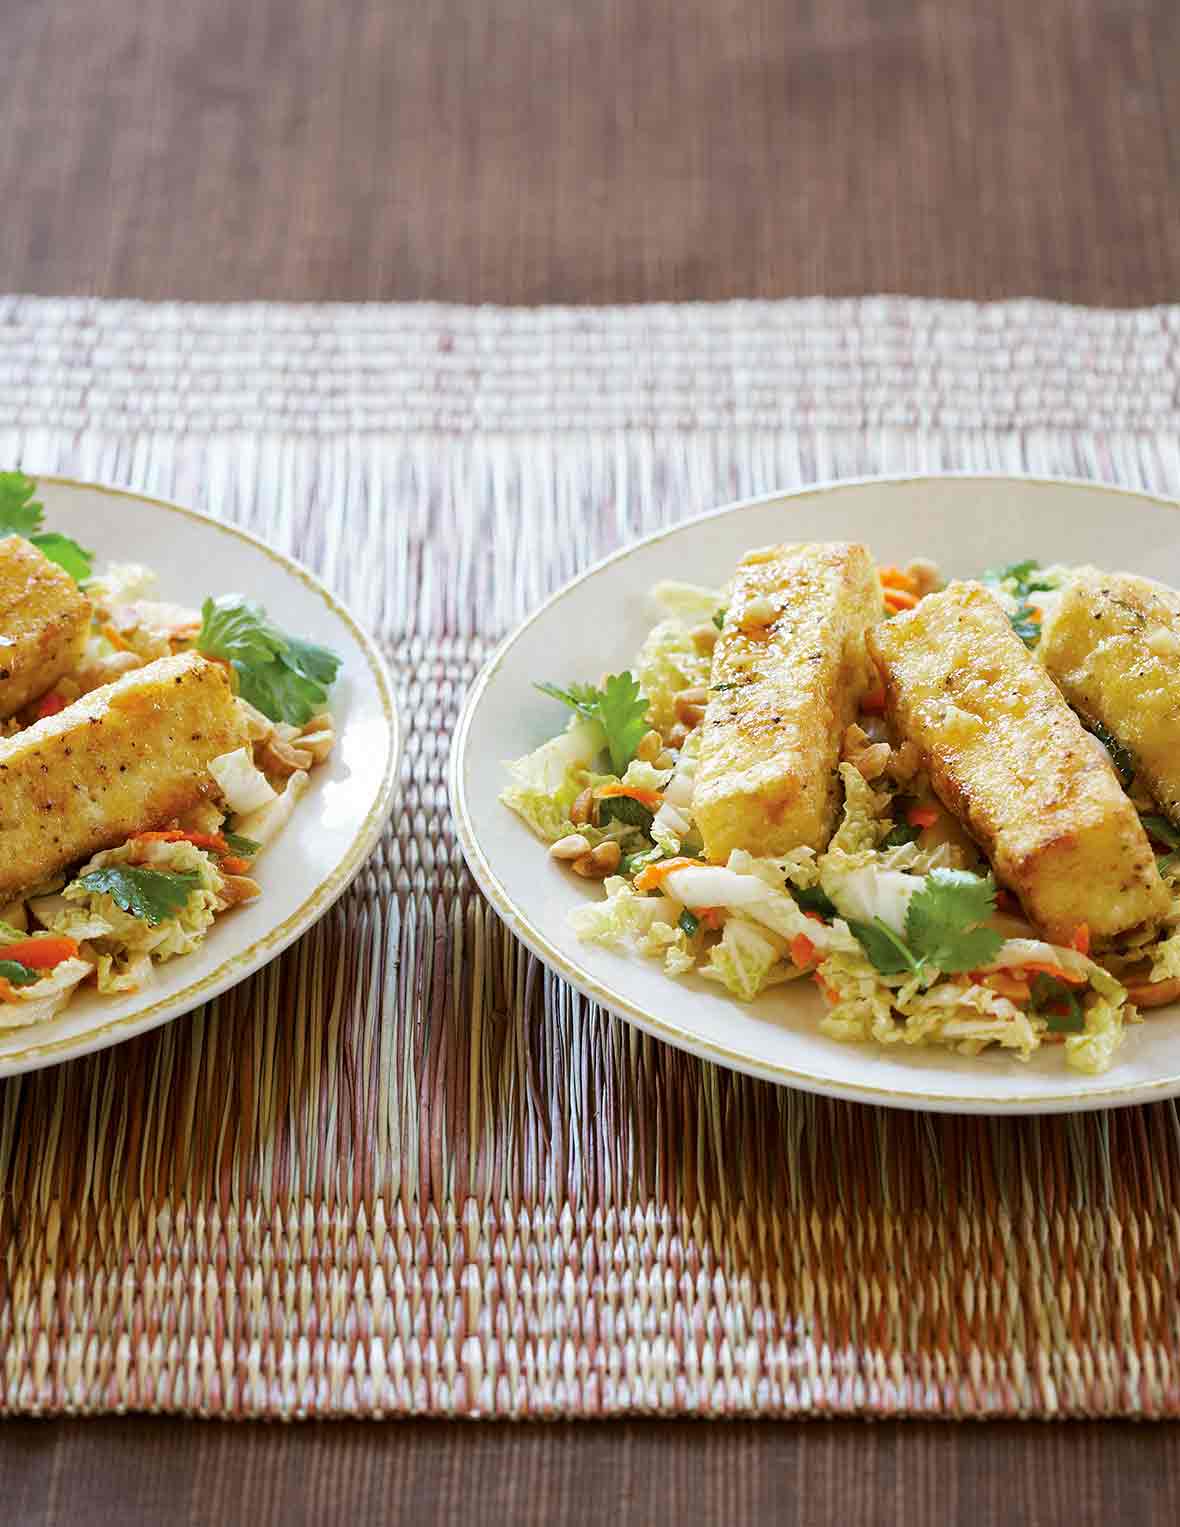 Two plates of warm cabbage salad with fried crispy tofu, carrots, cilantro on woven placemats